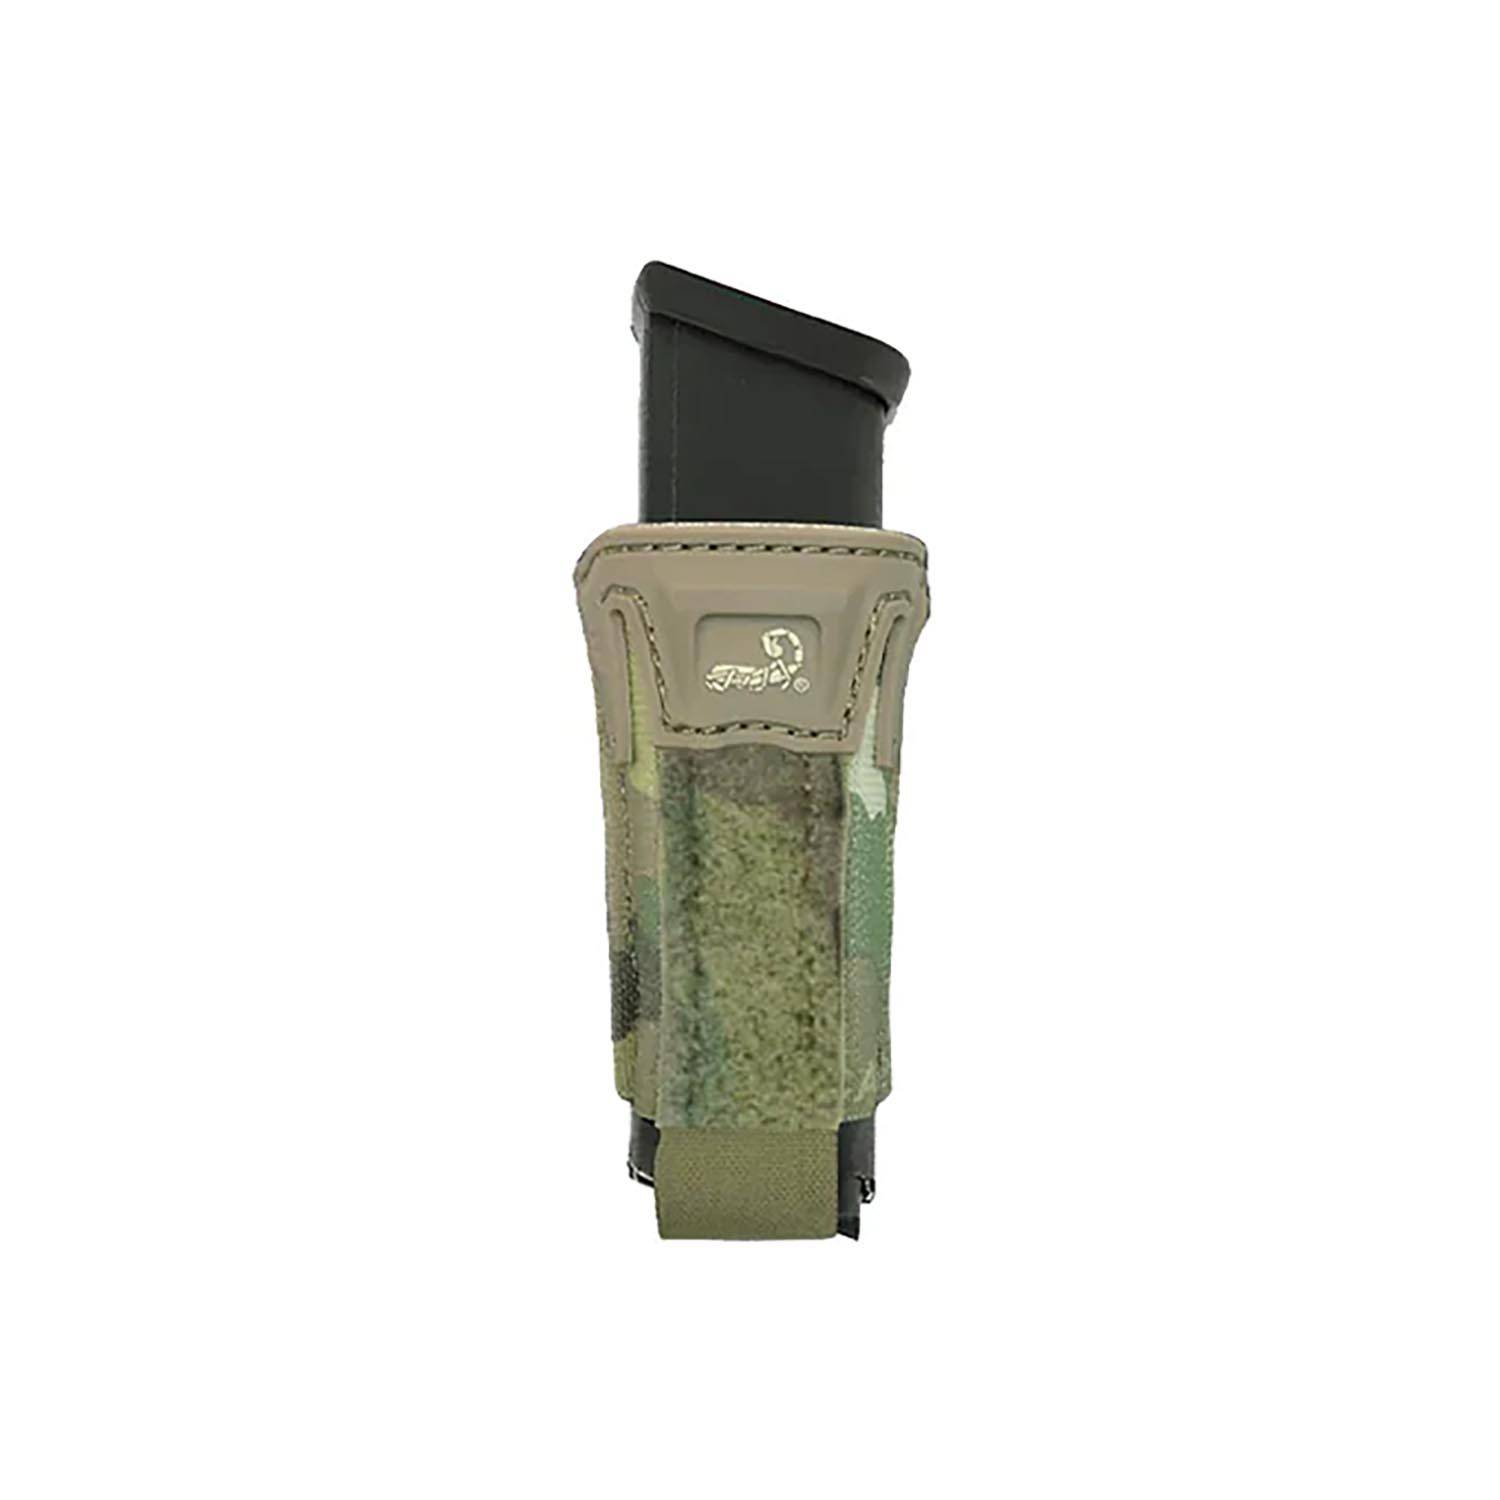 AGILITE PINCER PISTOL SINGLE MAG POUCH